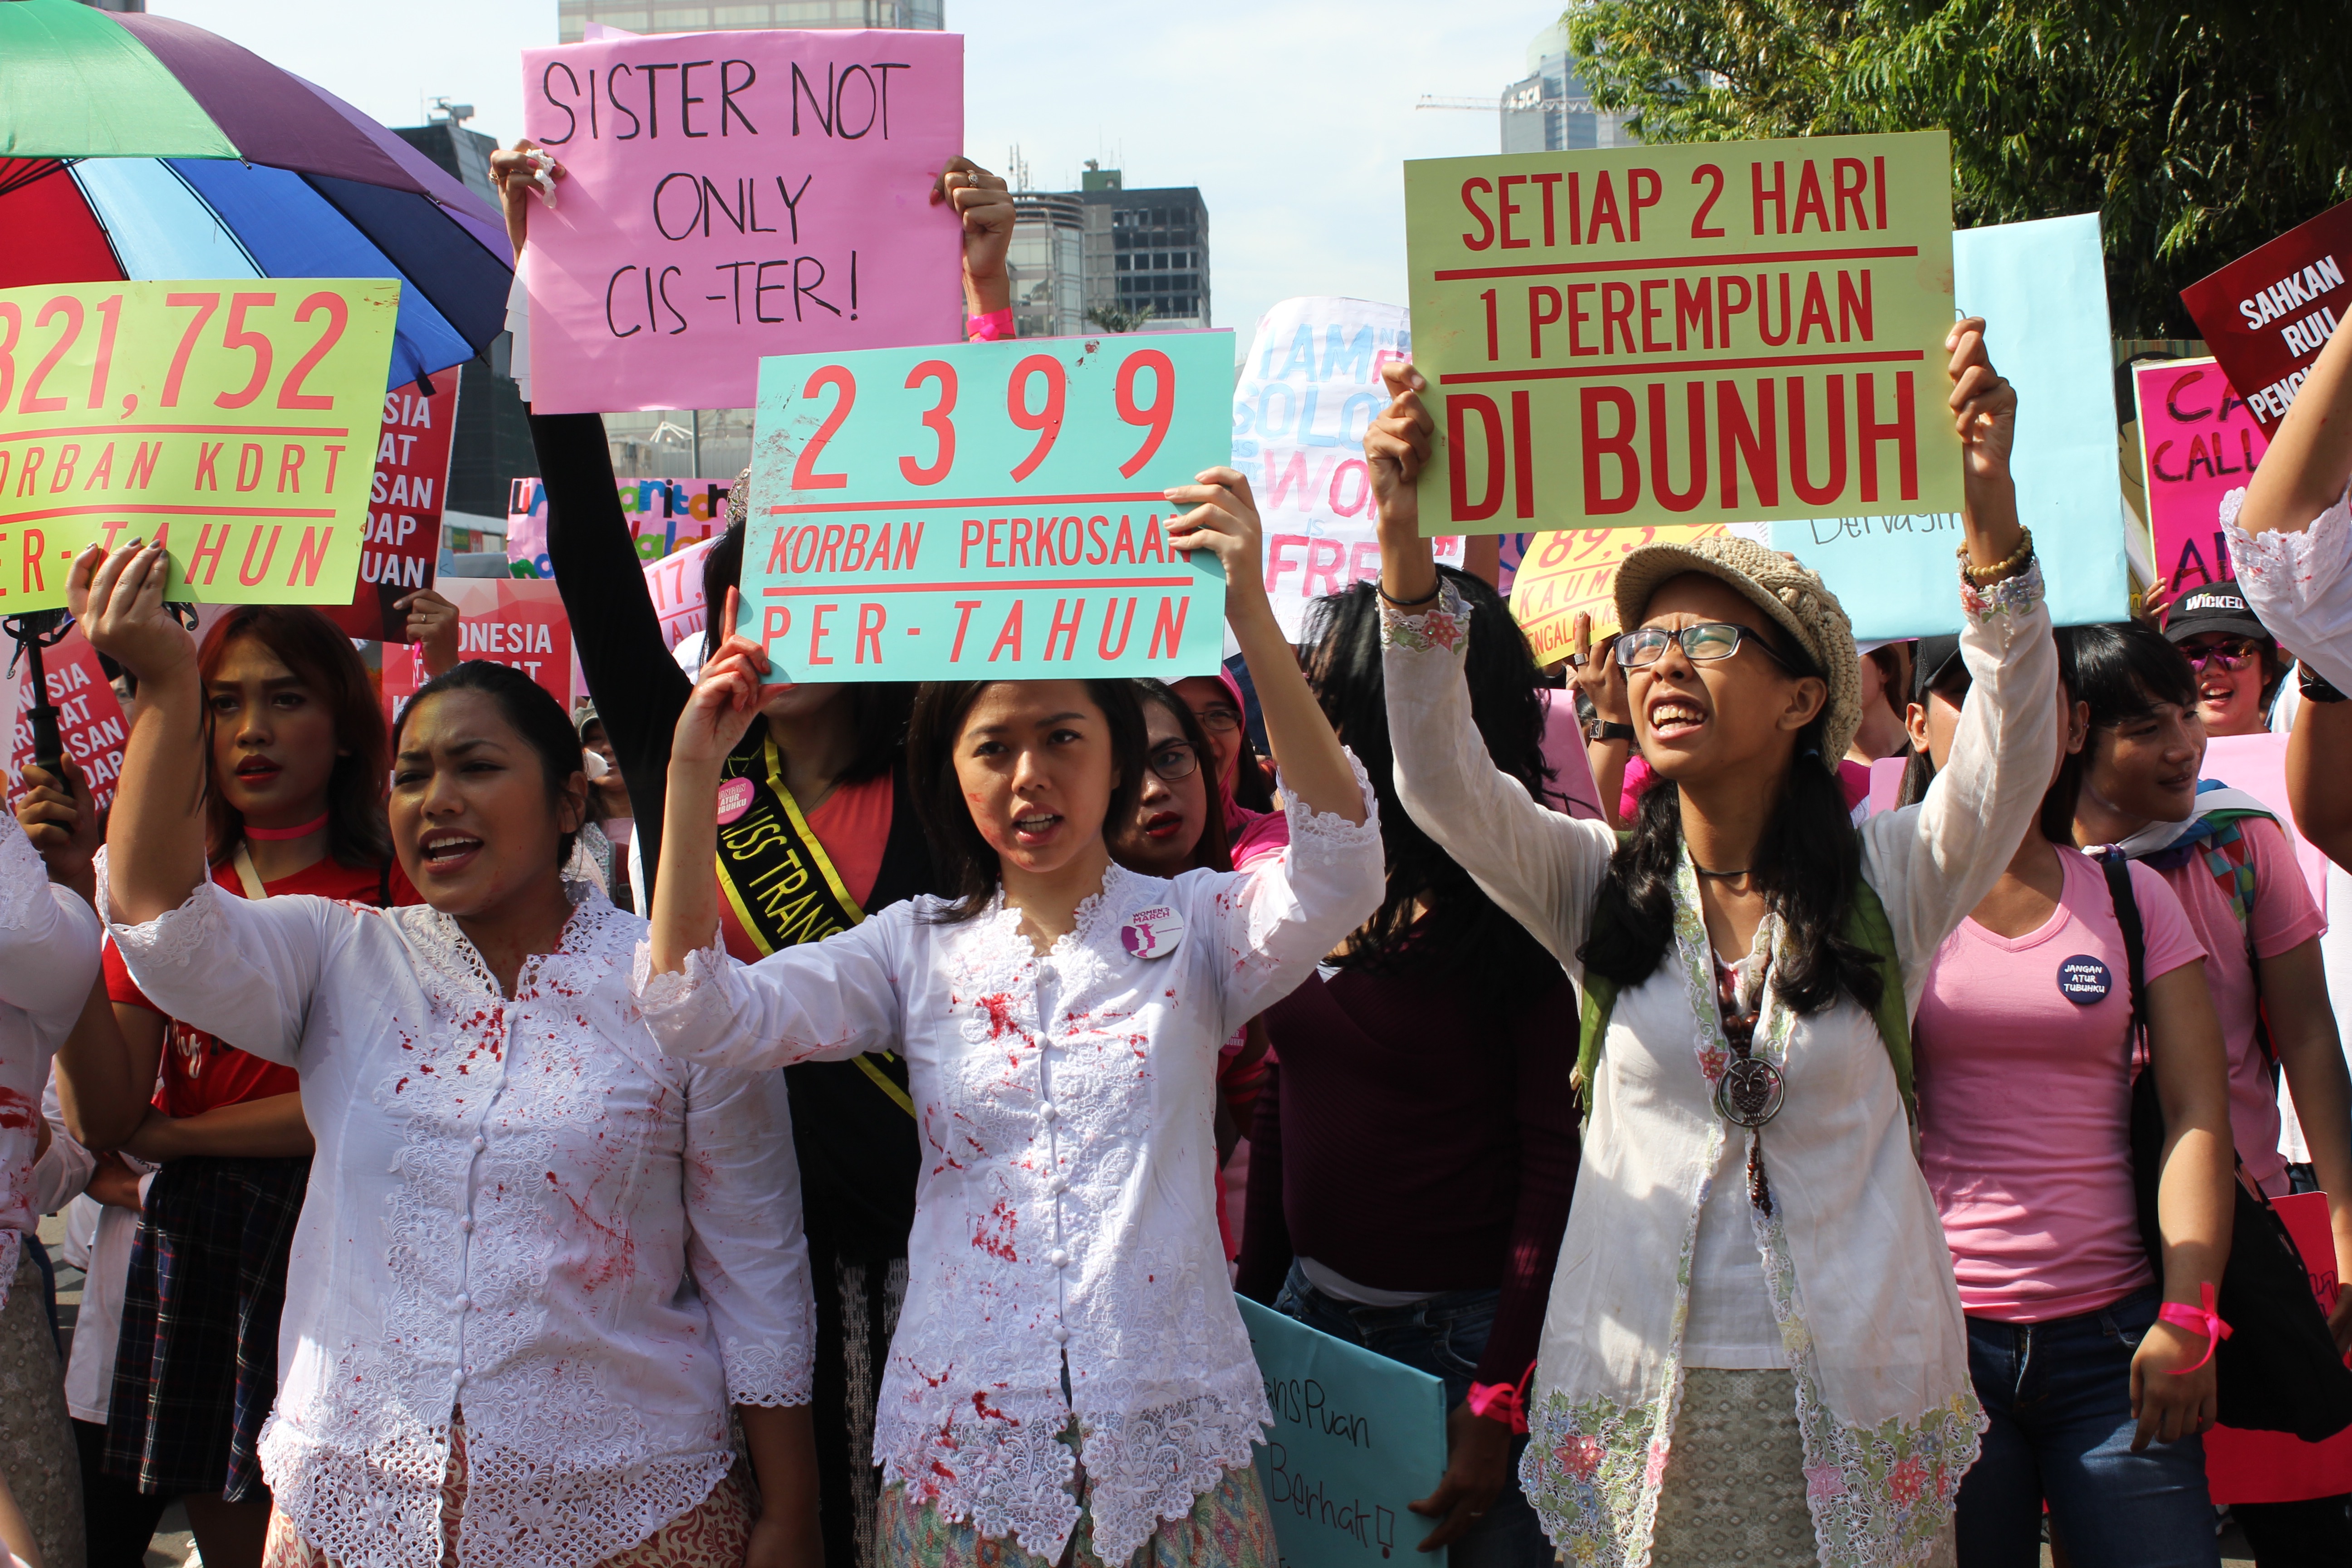 Activists holding up signs during Jakarta Women’s March on March 4, 2017.  Many of the same people behind the Jakarta Women’s March have organized this weekend’s Feminist Fest. Photo: Coconuts Media / Andra Nasrie